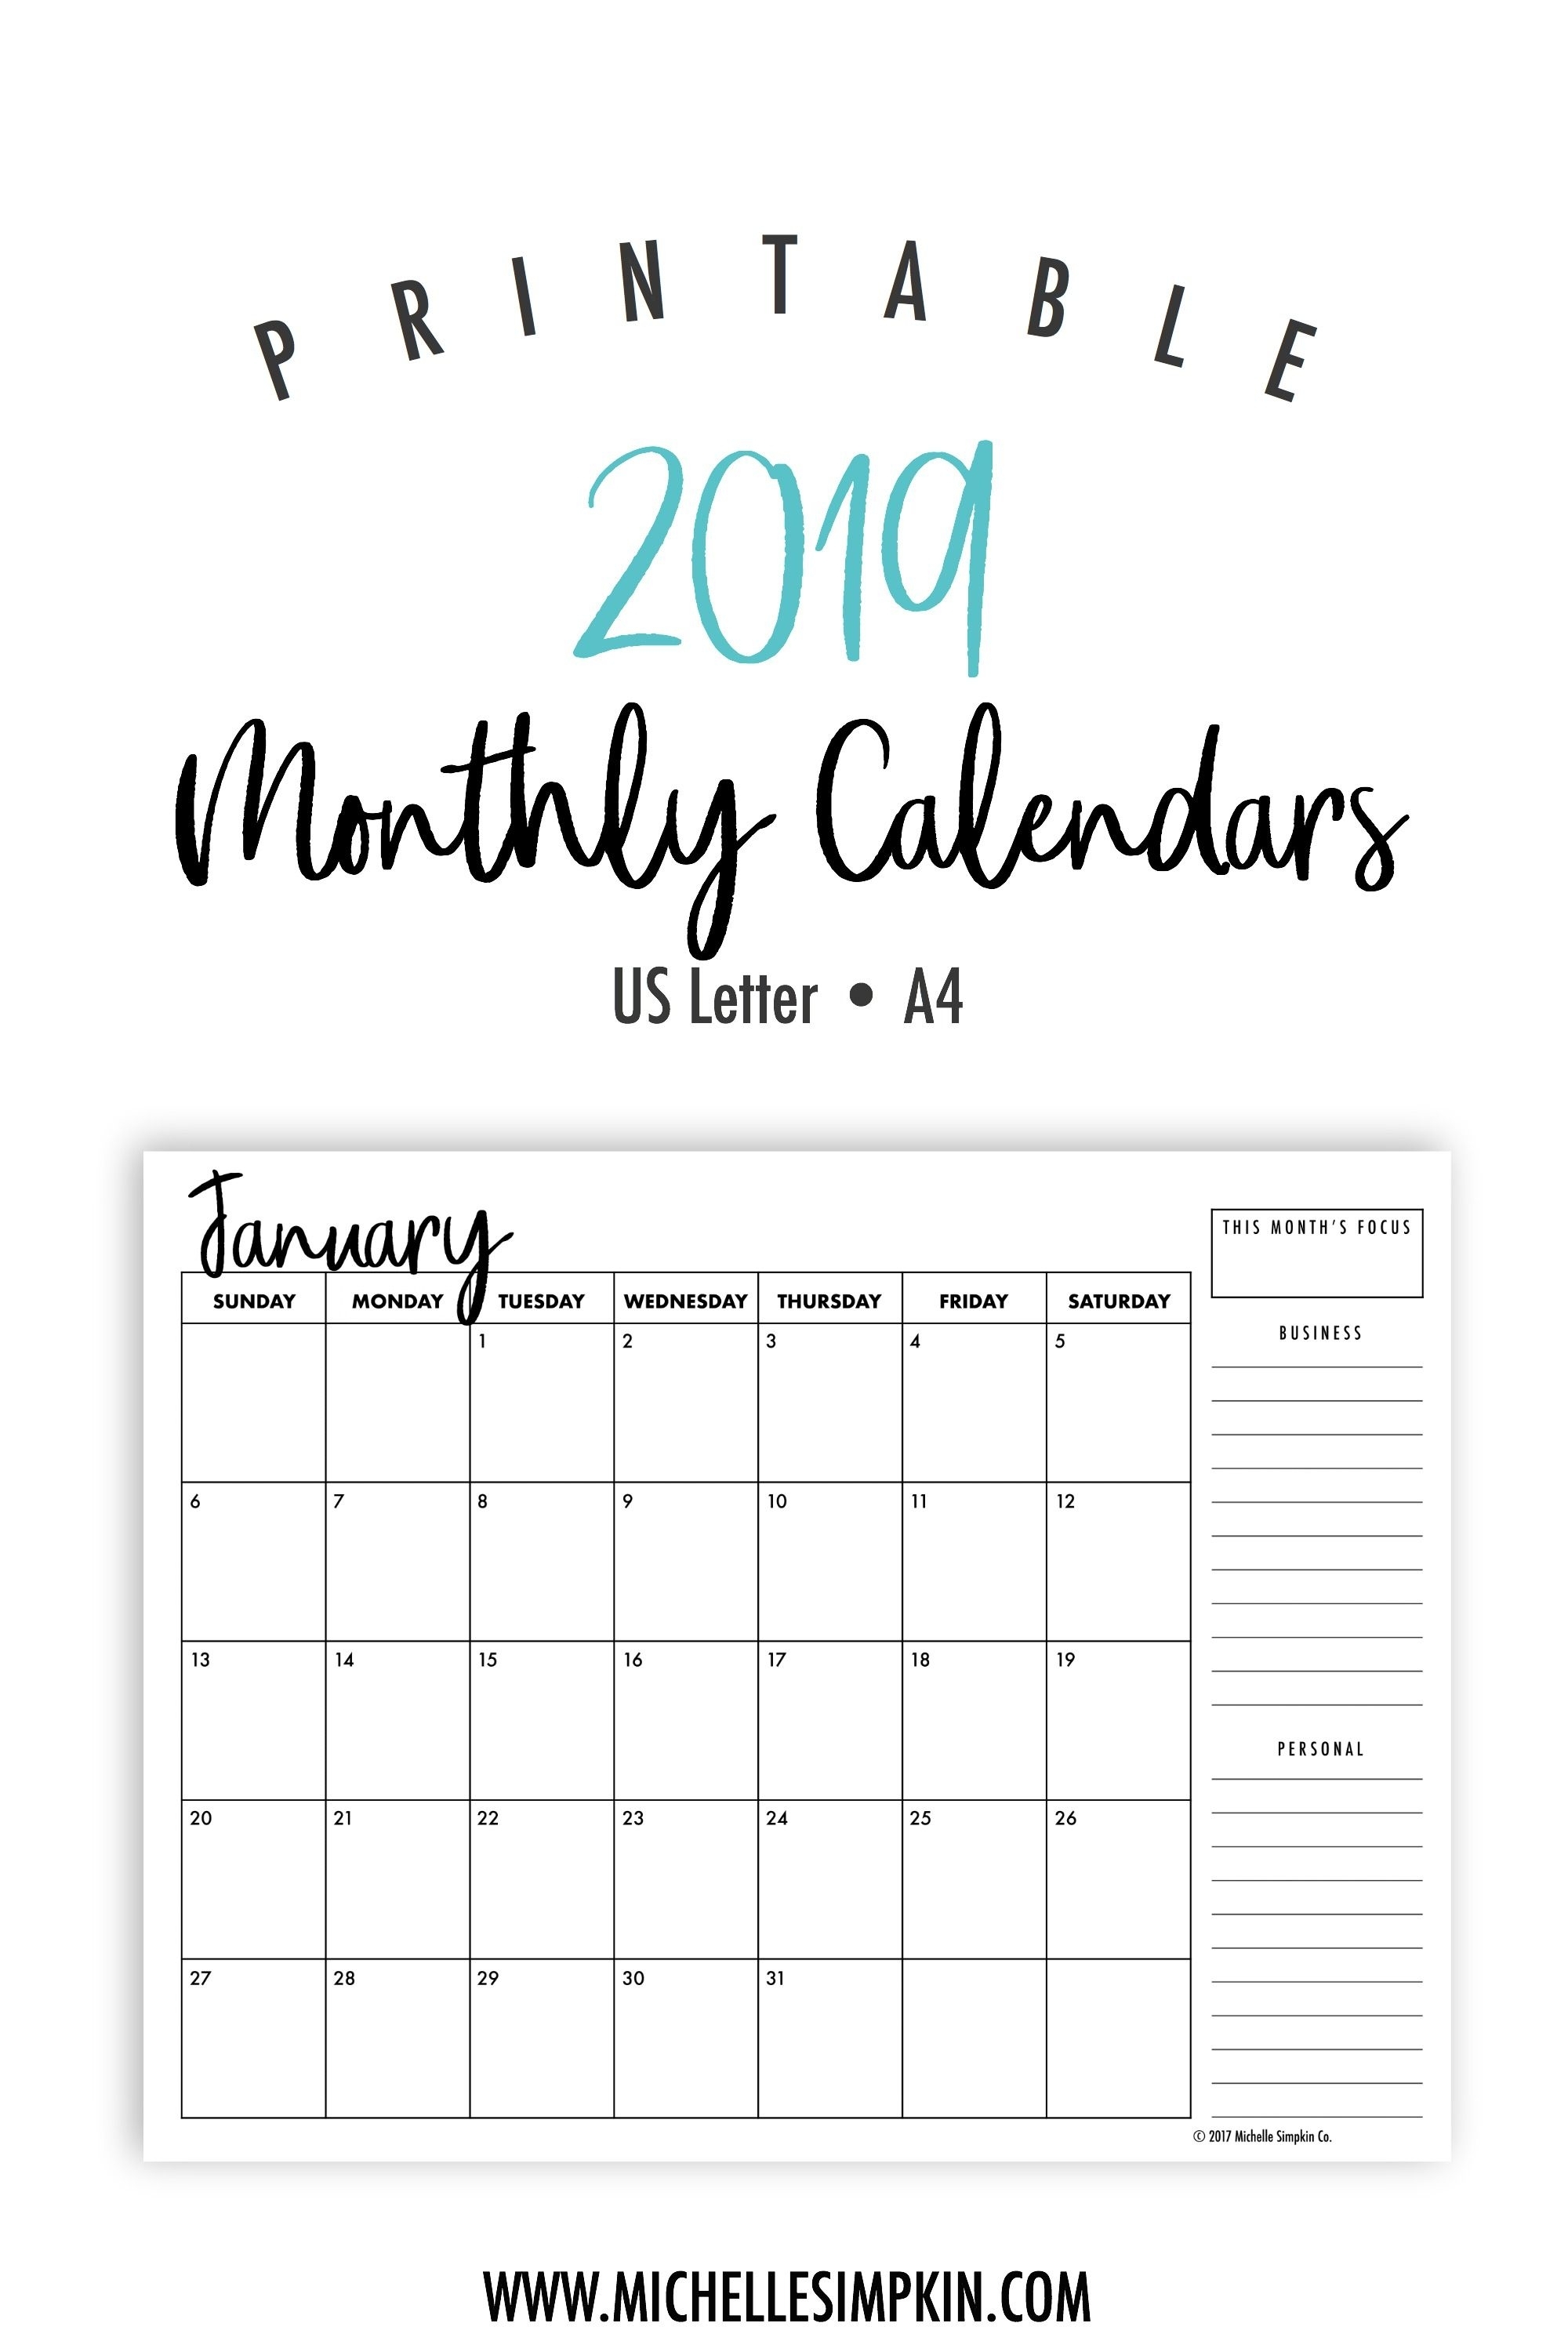 Printable Calendar With Lines To Write On 2019 | Printable Calendar 2019 regarding Printable Calendar 2019 2020 Write On